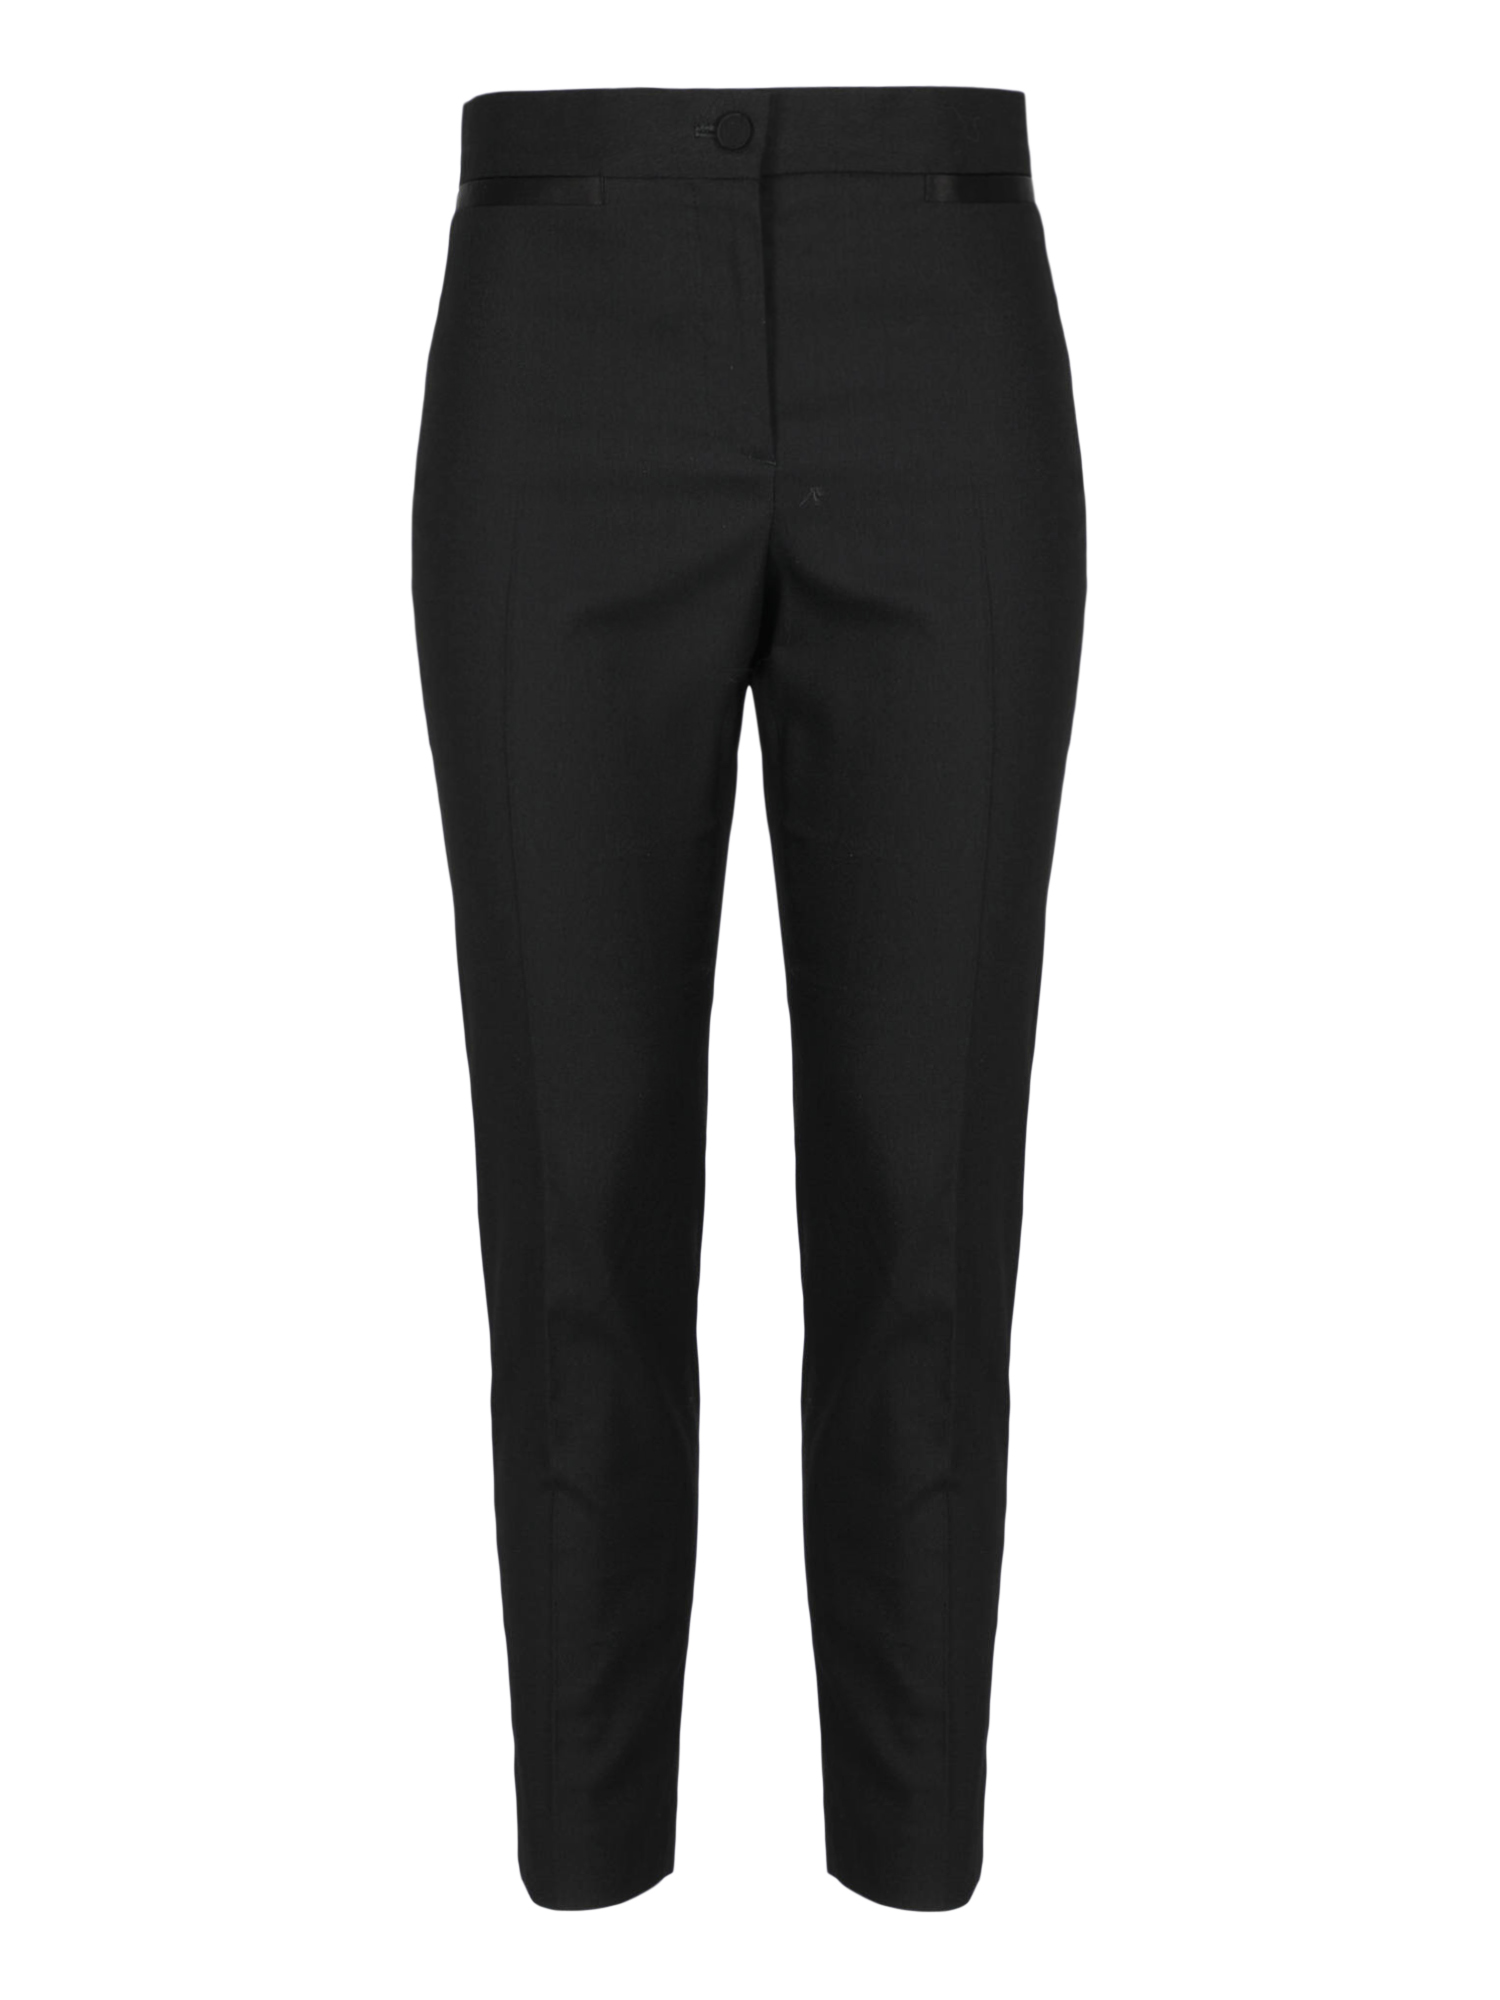 Pre-owned Burberry Women's Trousers -  - In Black Wool